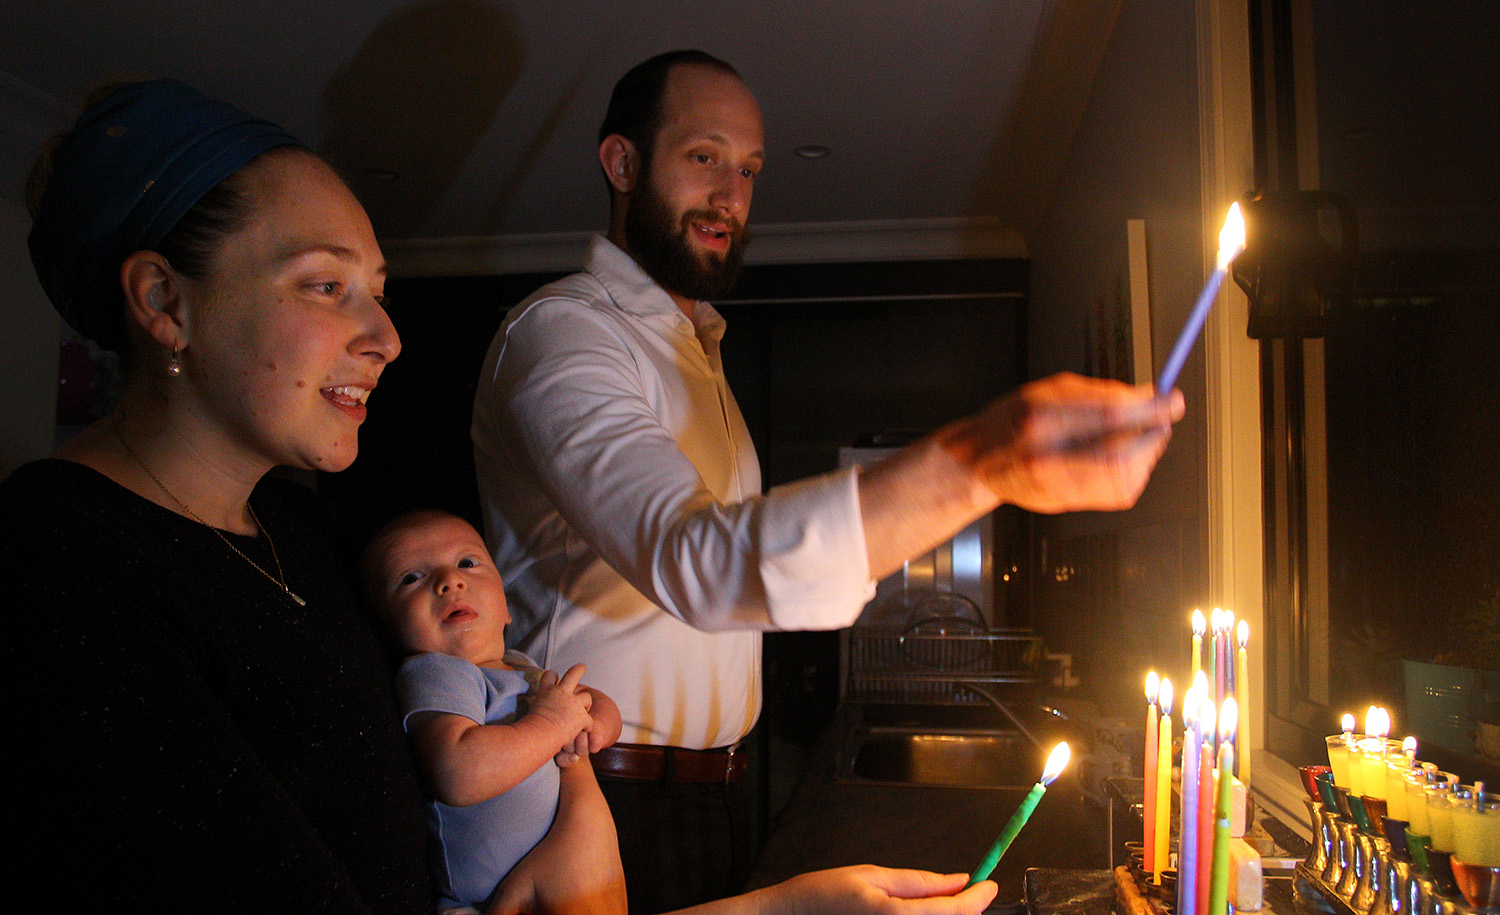 A family light their menorah at home on December 15, 2020 in Sydney, Australia. Lisa Maree Williams/Getty Images.
